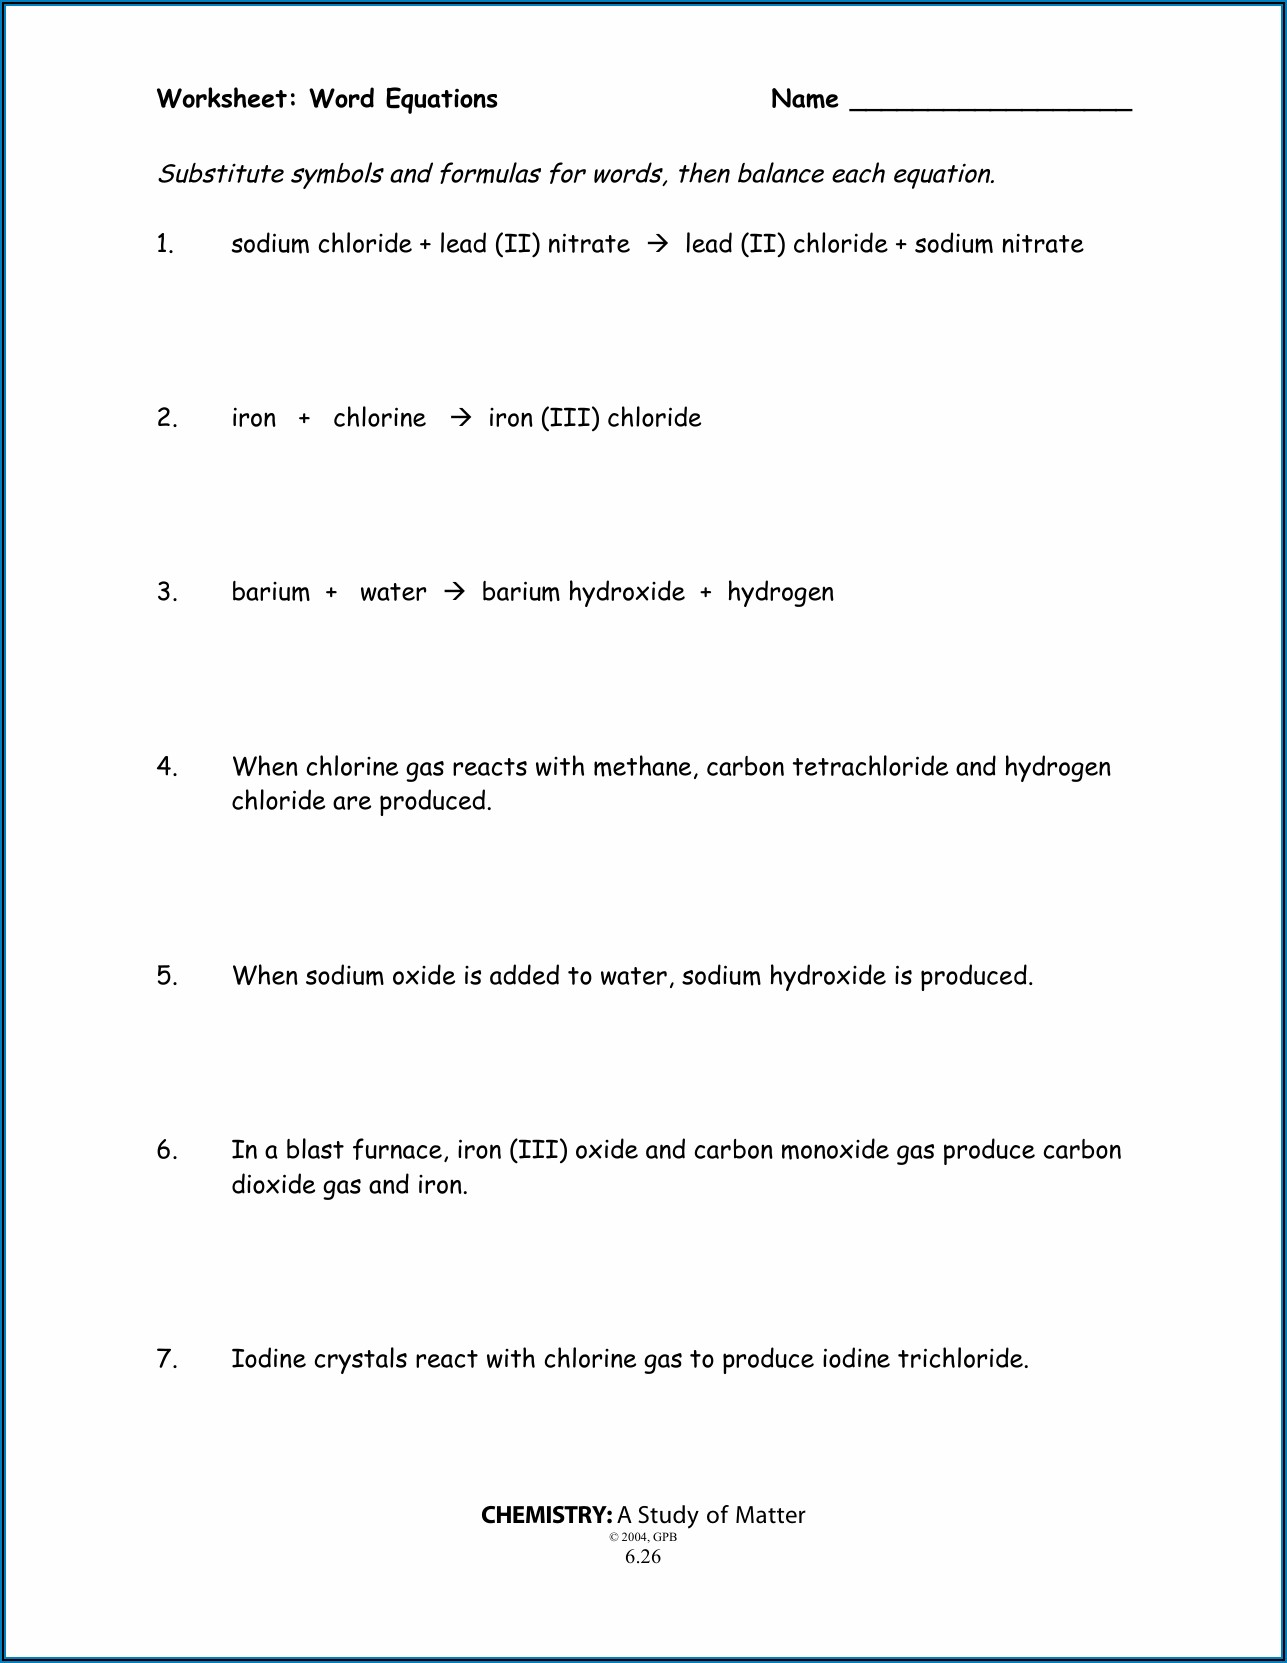 Worksheet Word Equations Chemistry A Study Of Matter 6.26